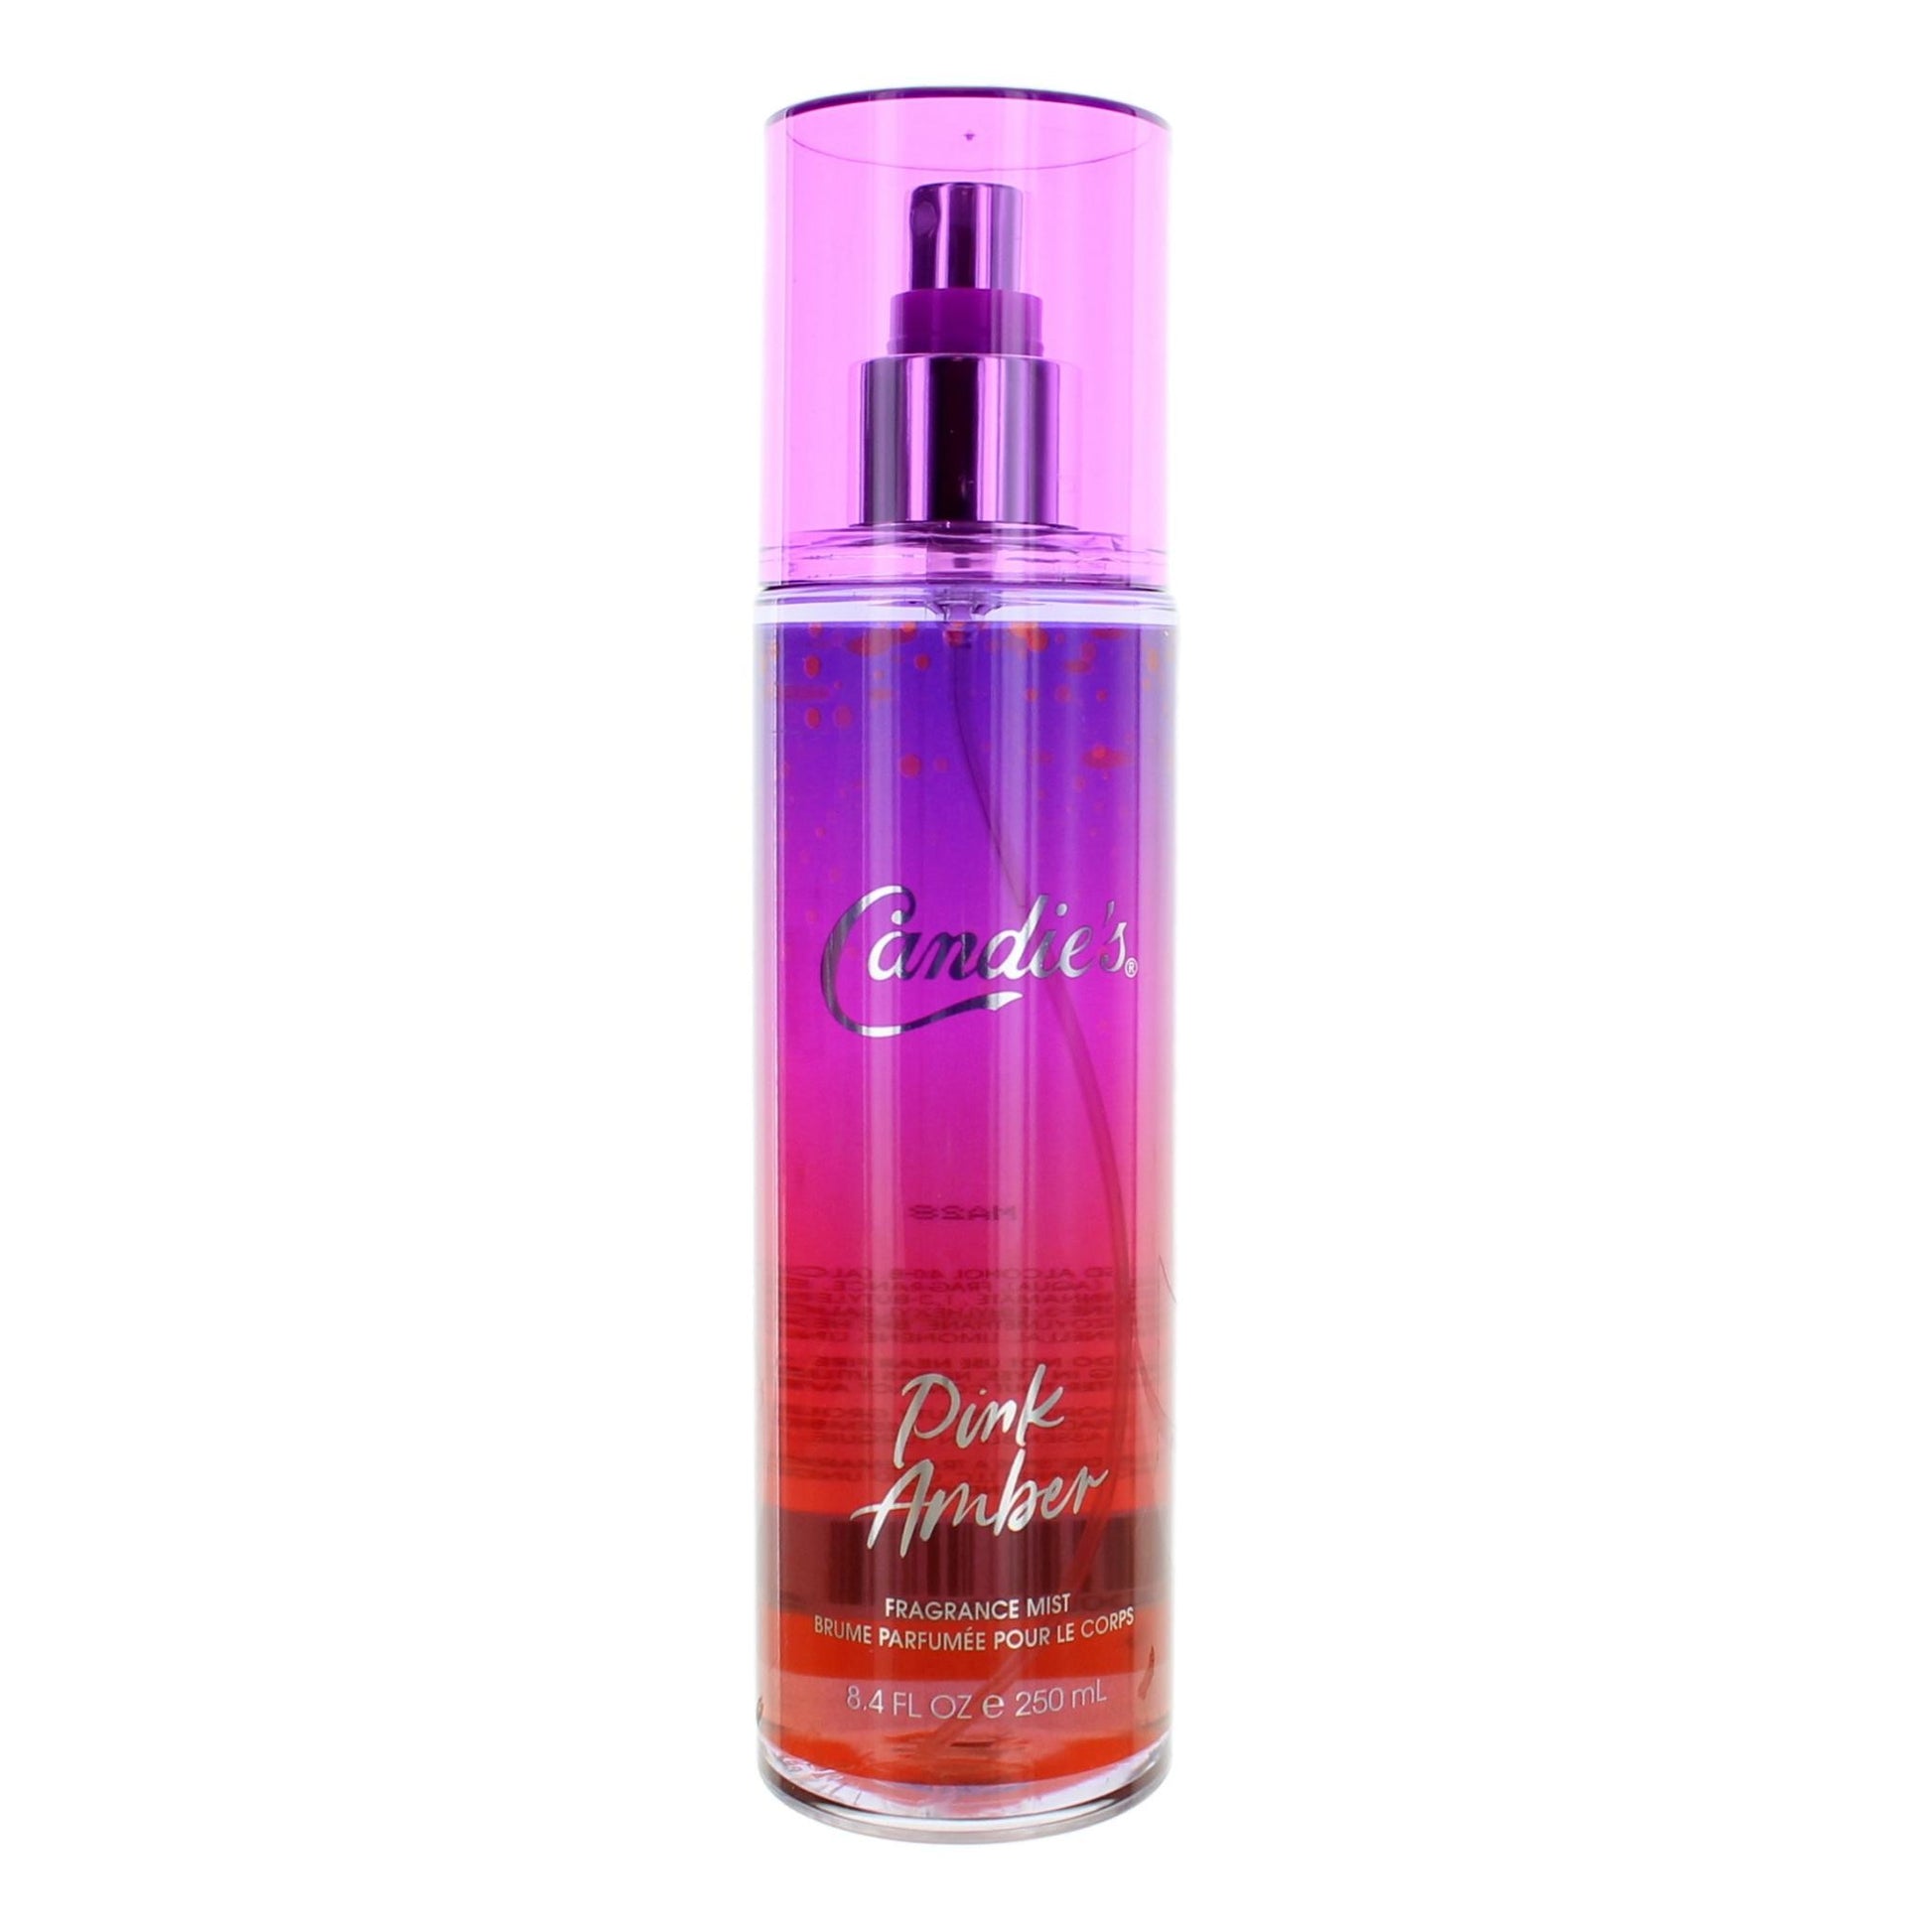 Pink Amber by Candie's, 8.4 oz Fragrance Mist for Women